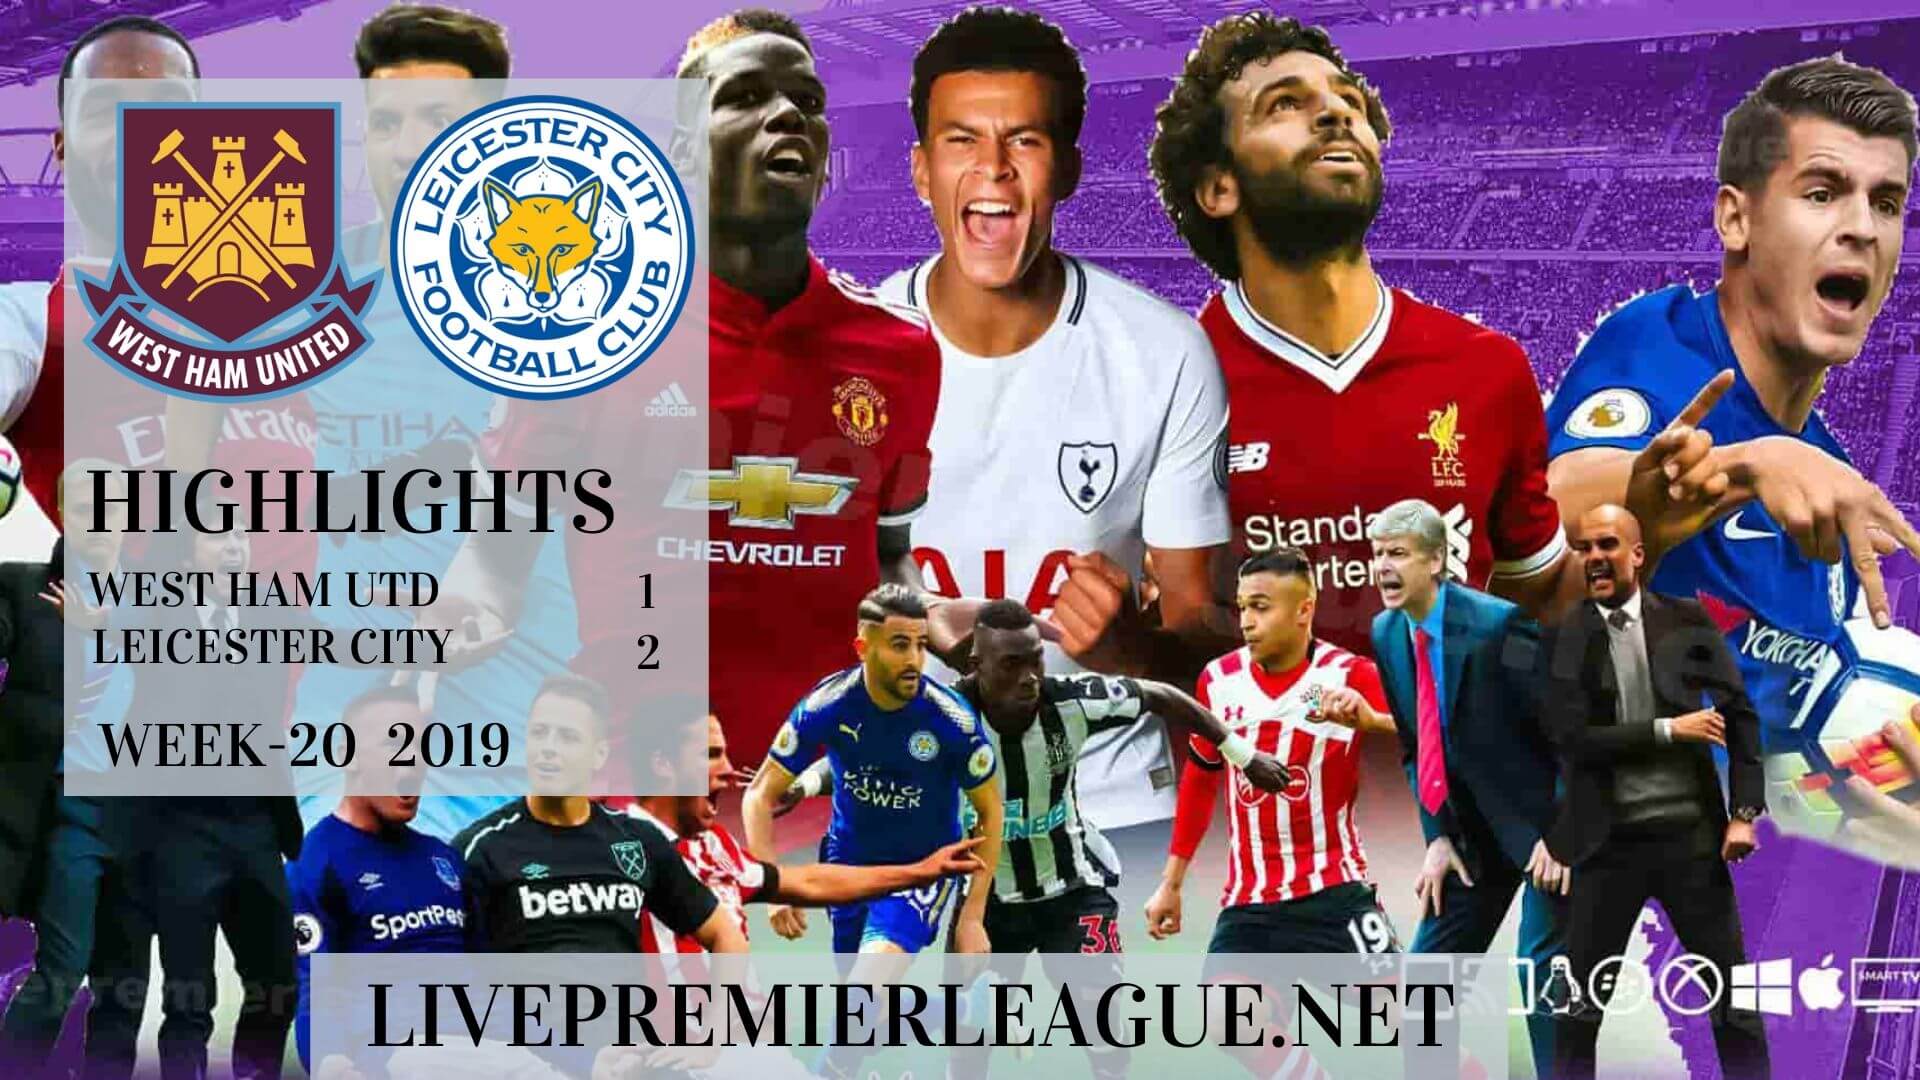 West Ham United Vs Leicester City Highlights 2019 Week 20